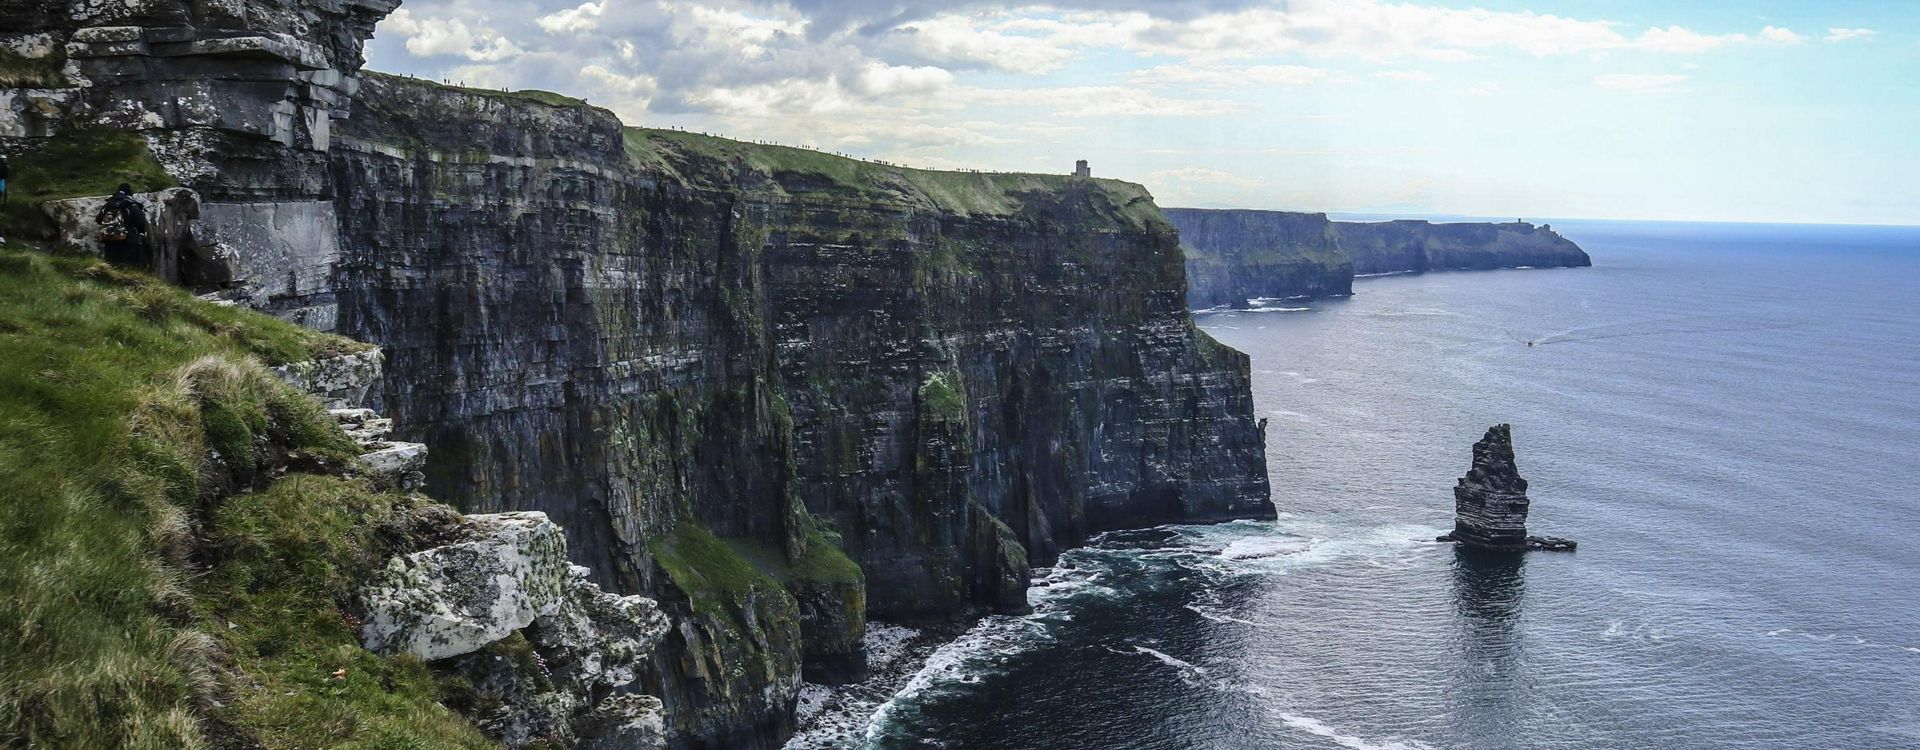 G Adventures Highlights of Ireland galway and cliffs of moher.jpg